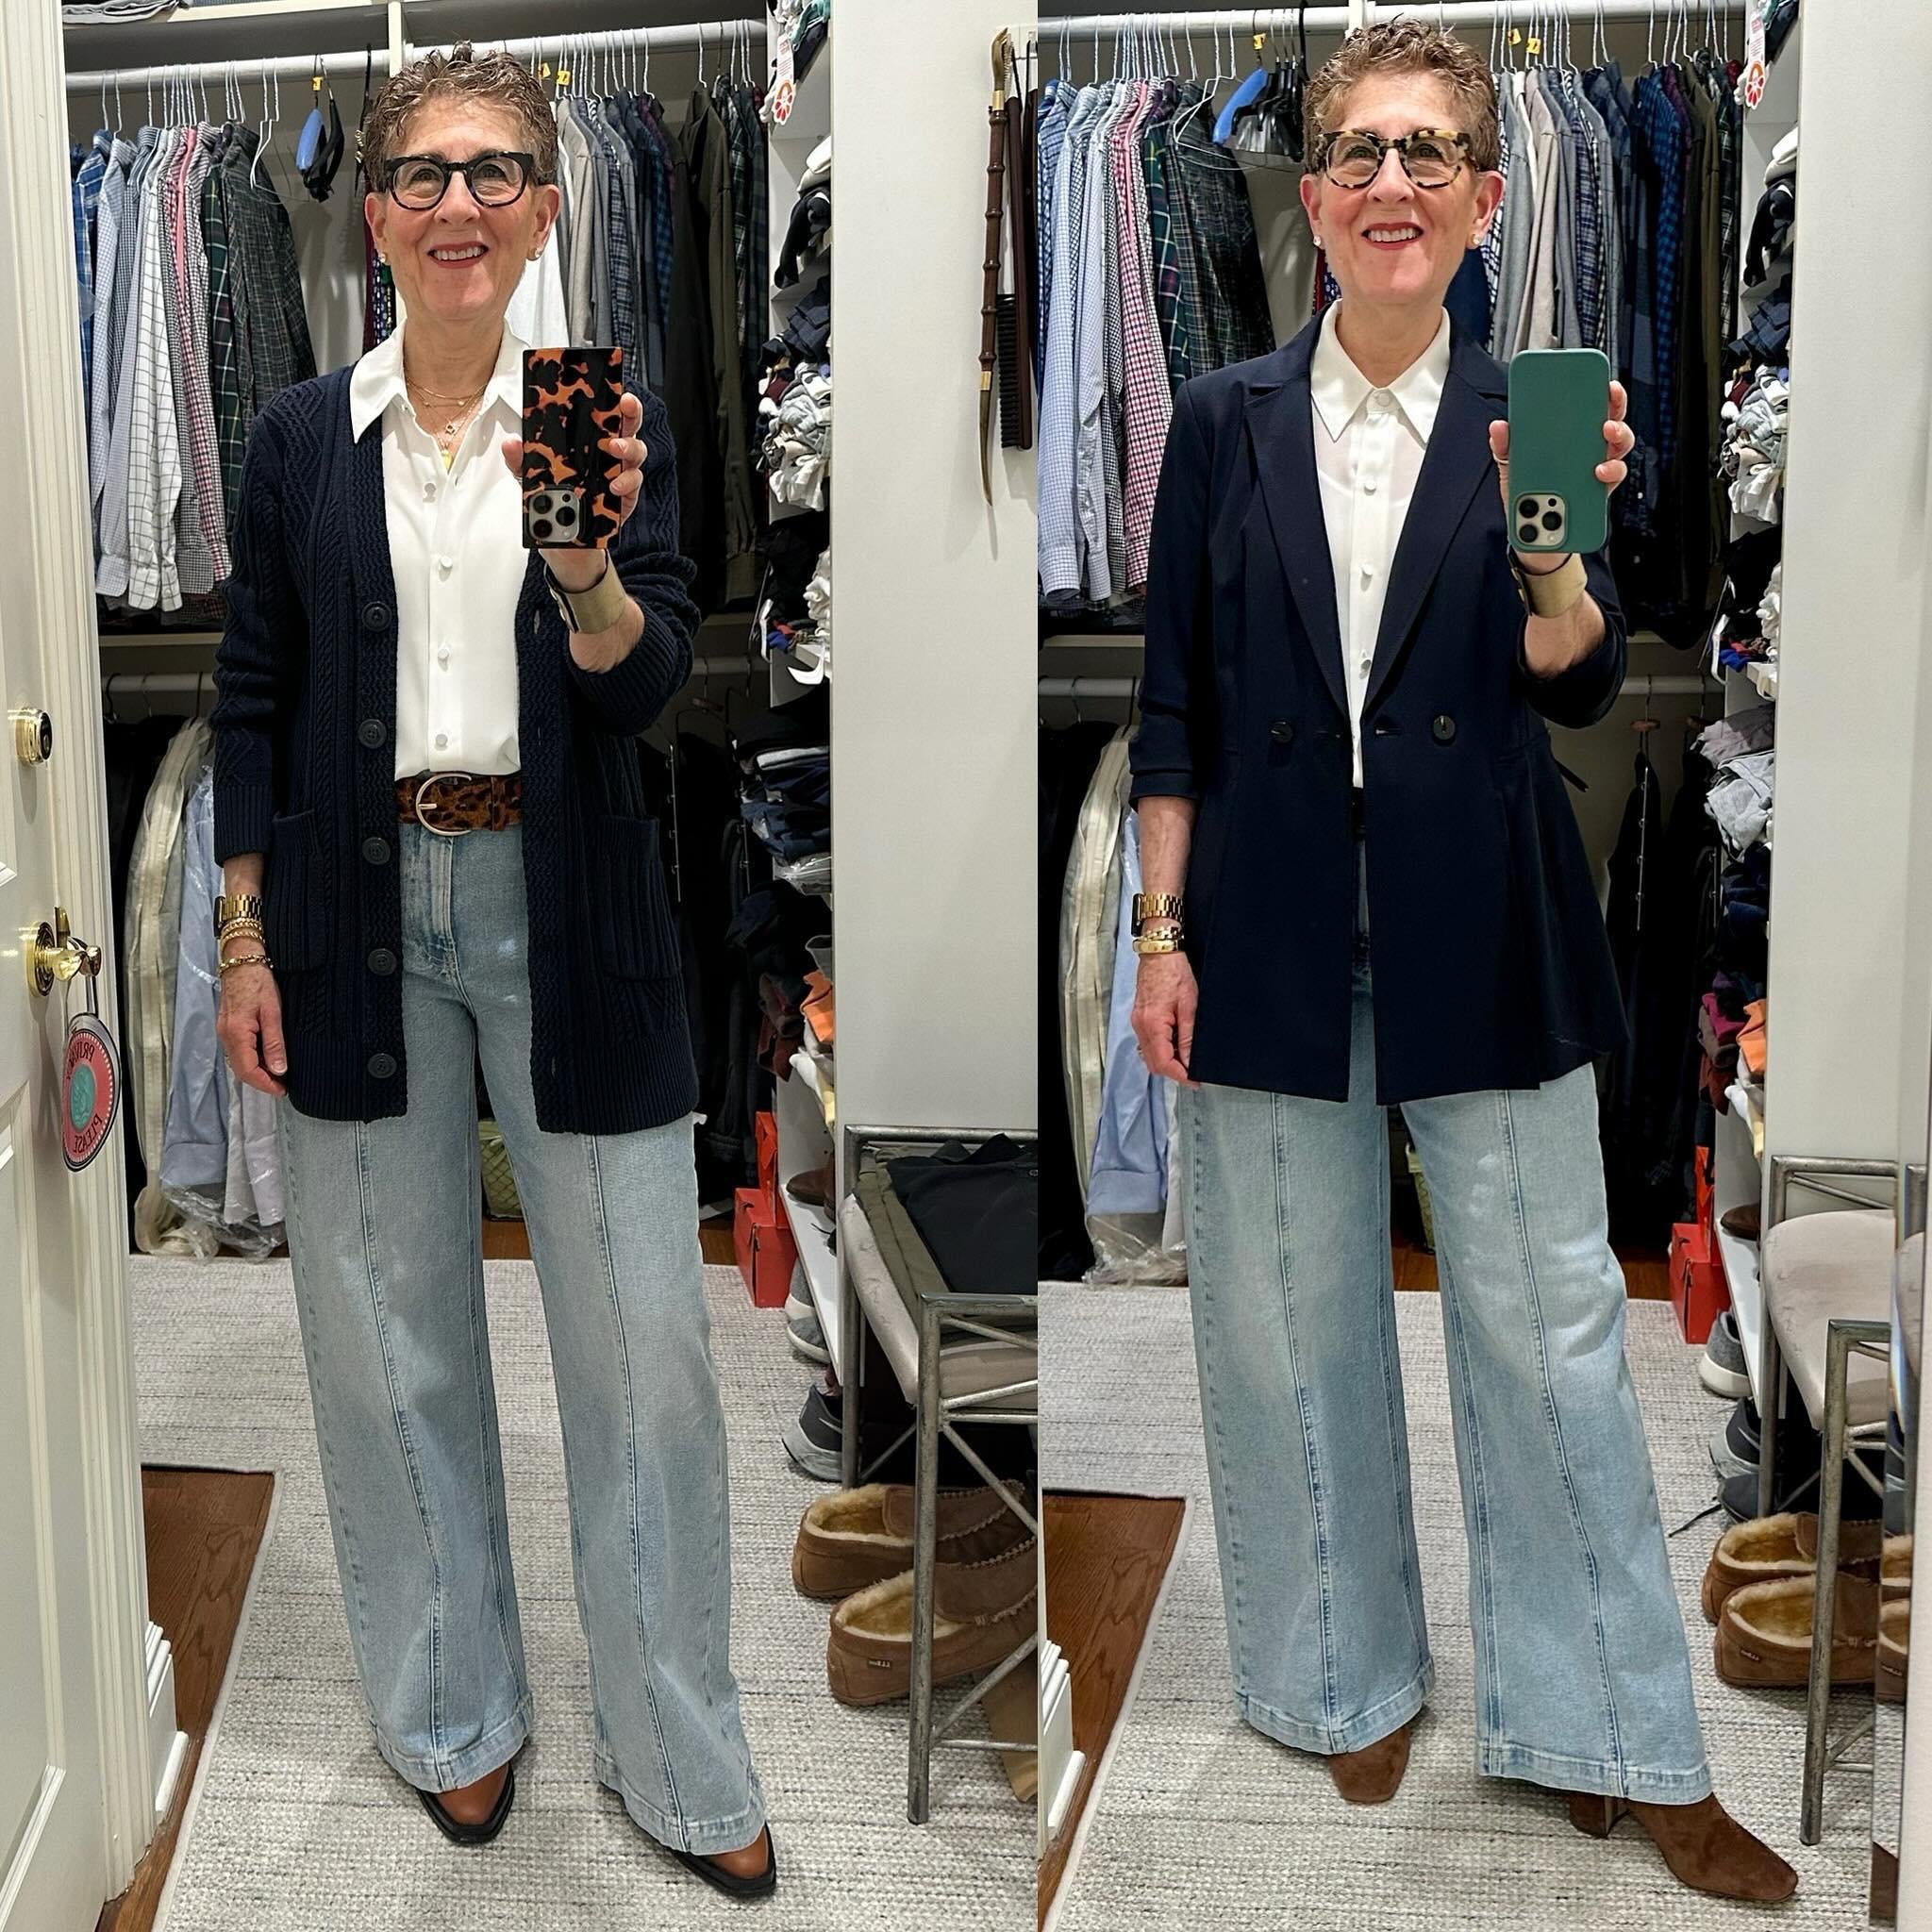 Today, I amended a look I&rsquo;ve already posted in order to make it a bit more casual. Here are both versions so you can see the change that small edits can make. First of all, I&rsquo;m wearing the same jeans and blouse in both looks. But today, I